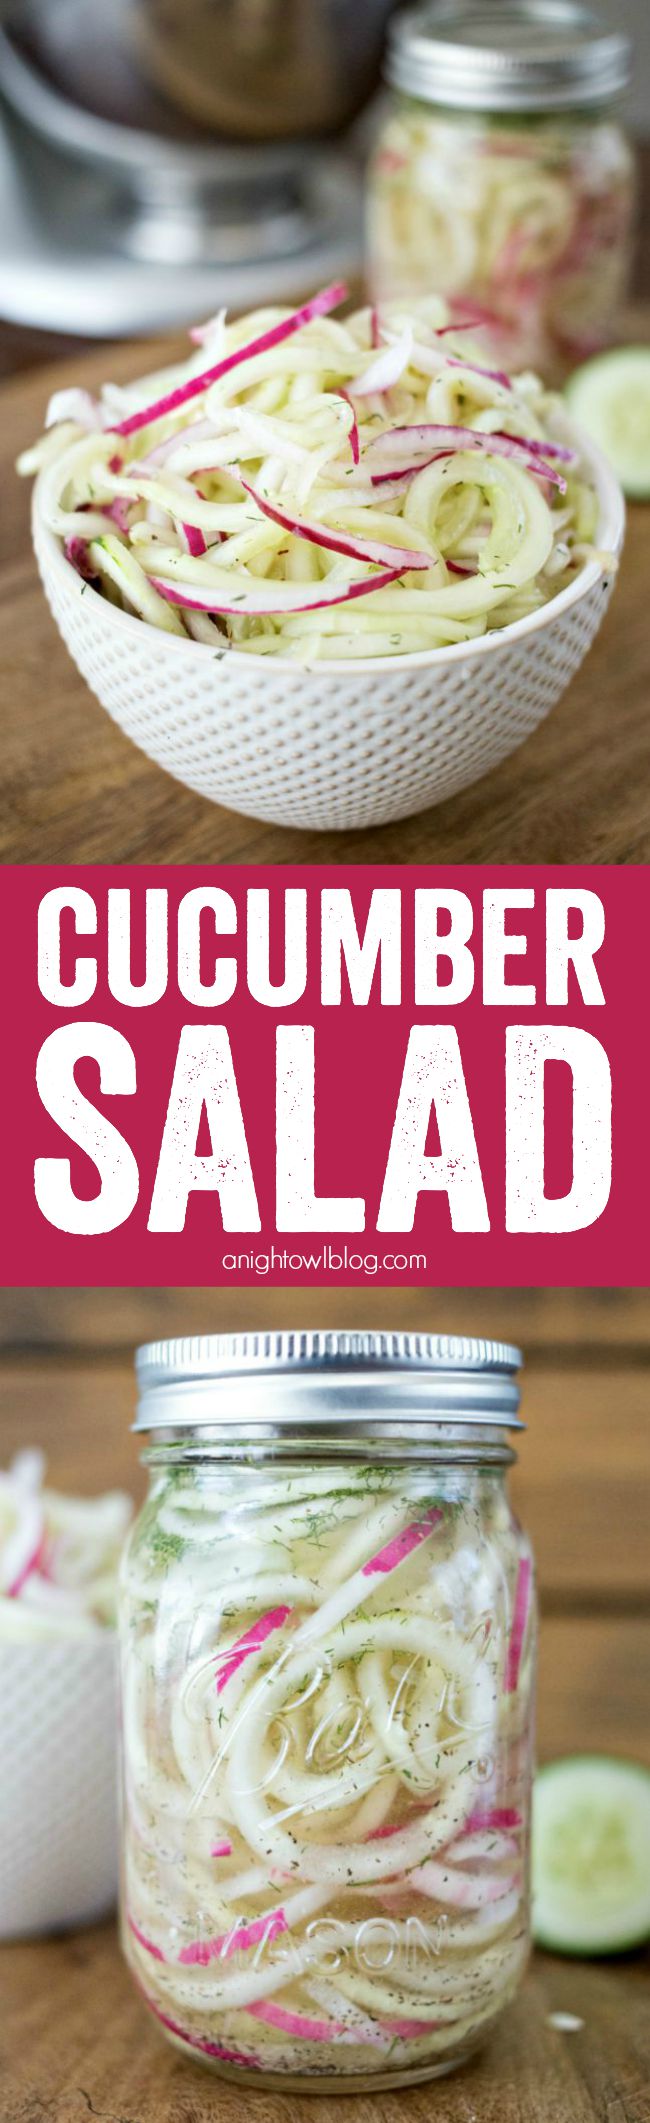 Easy Cucumber Salad - a delicious, no-fuss summer salad that is perfect for get togethers and BBQs!